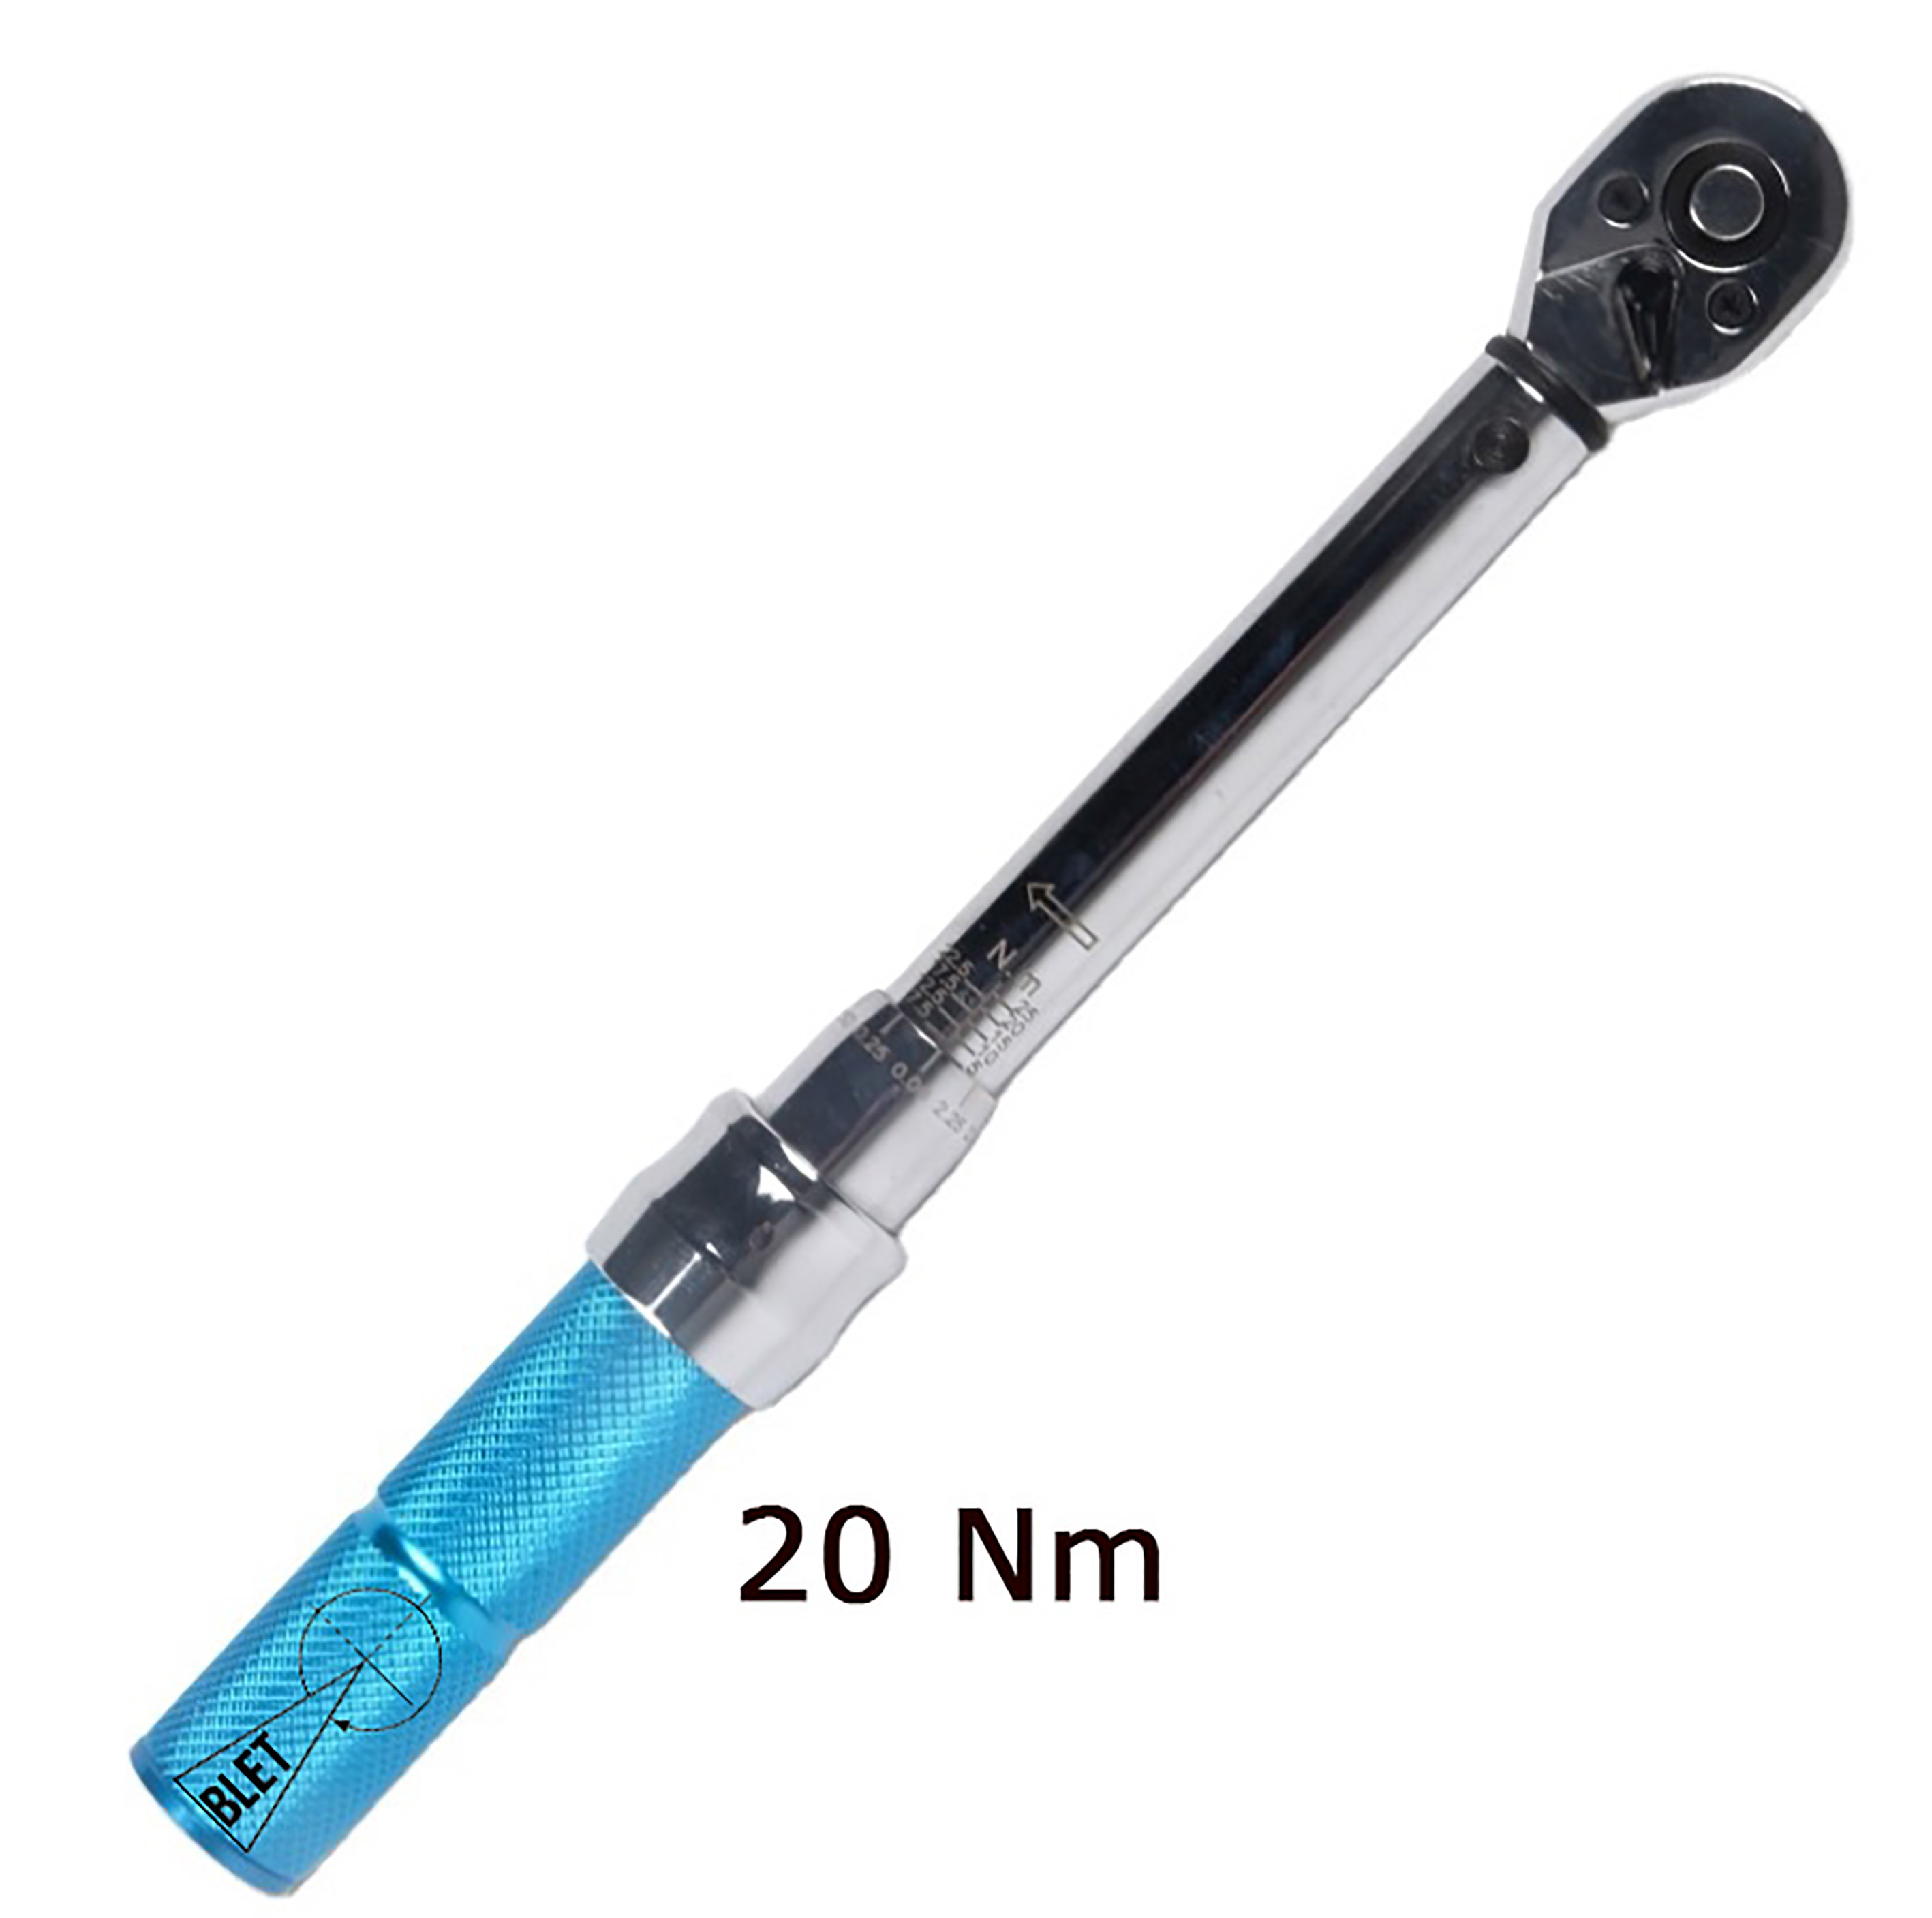 MECHANICAL TORQUE WRENCH 2-20 Nm READING 0,15 Nm SIZE 1/4" BLET<br>Ref : CLET5-CMC02014